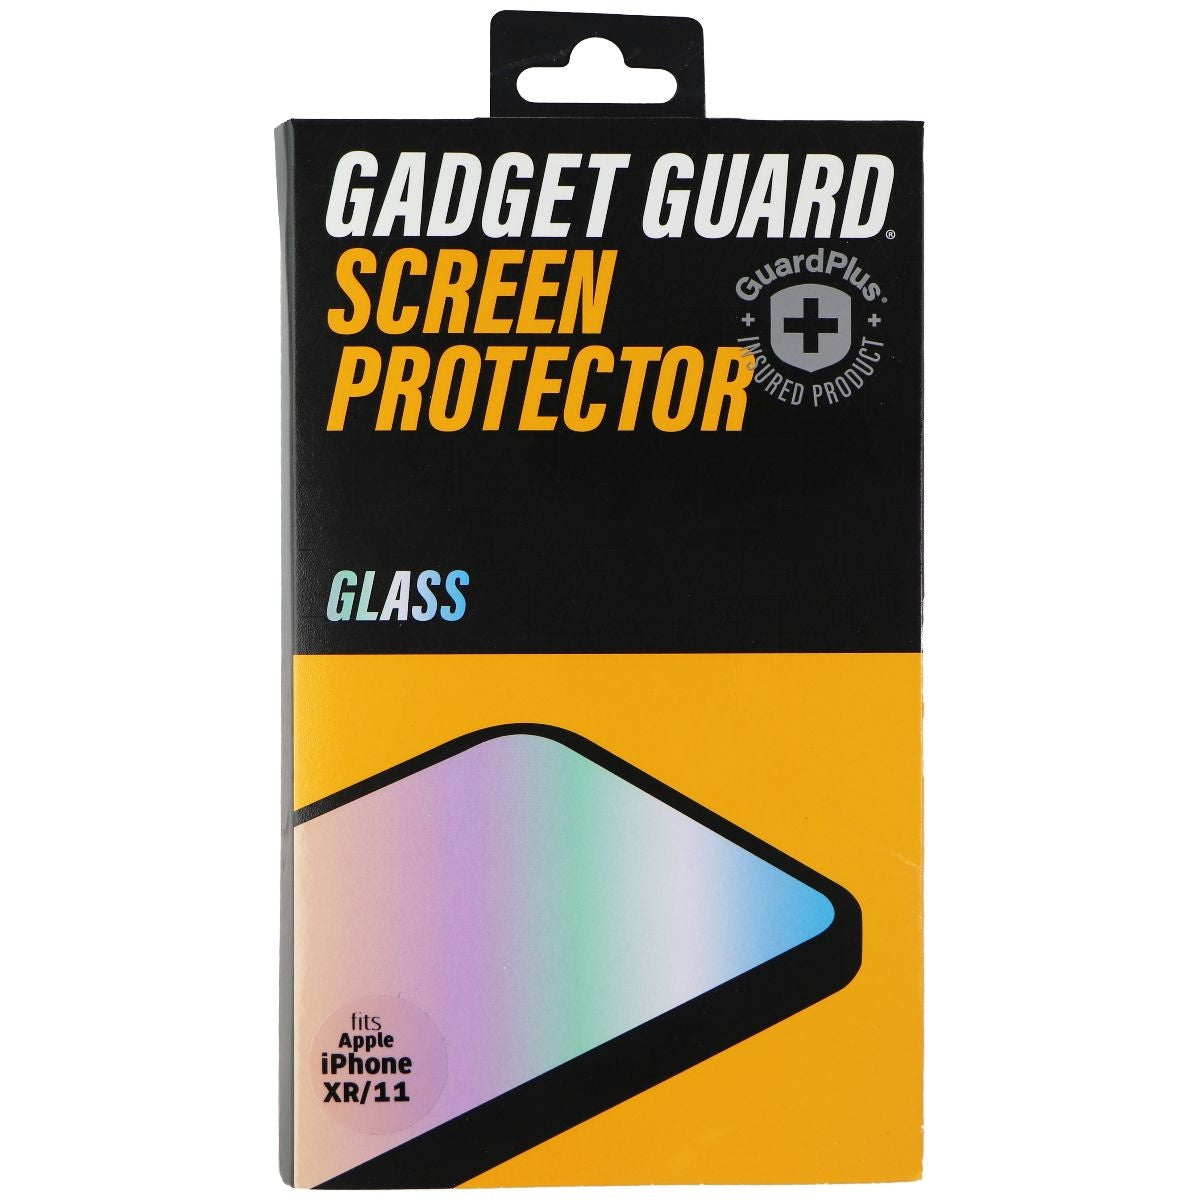 Gadget Guard Glass Screen Protector for Apple iPhone XR and iPhone 11 - Clear